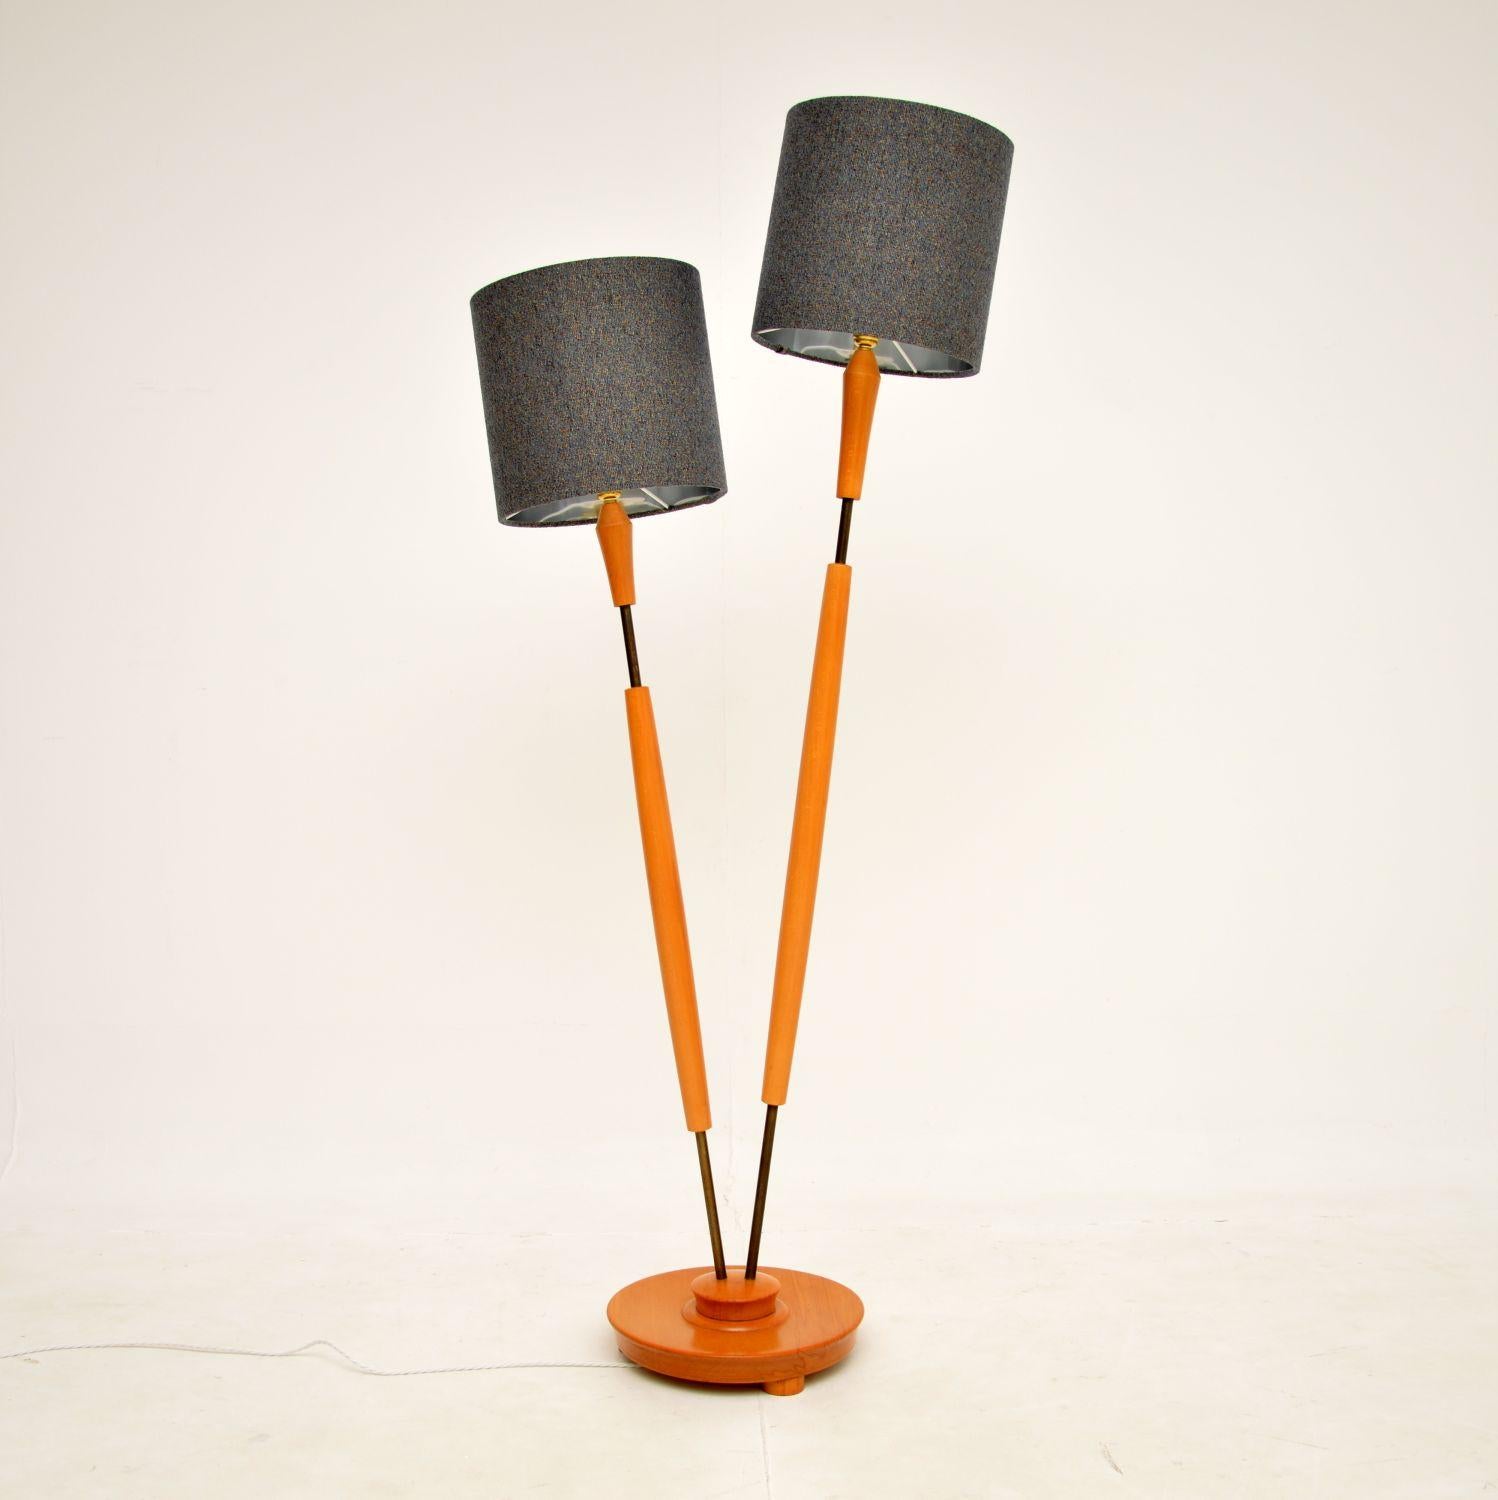 A stylish and very well made vintage floor lamp with two independent lamp stands coming from one base. This was made in England, it dates from the 1960-70’s.

The quality is superb and this has a very interesting design.

We have had the frame